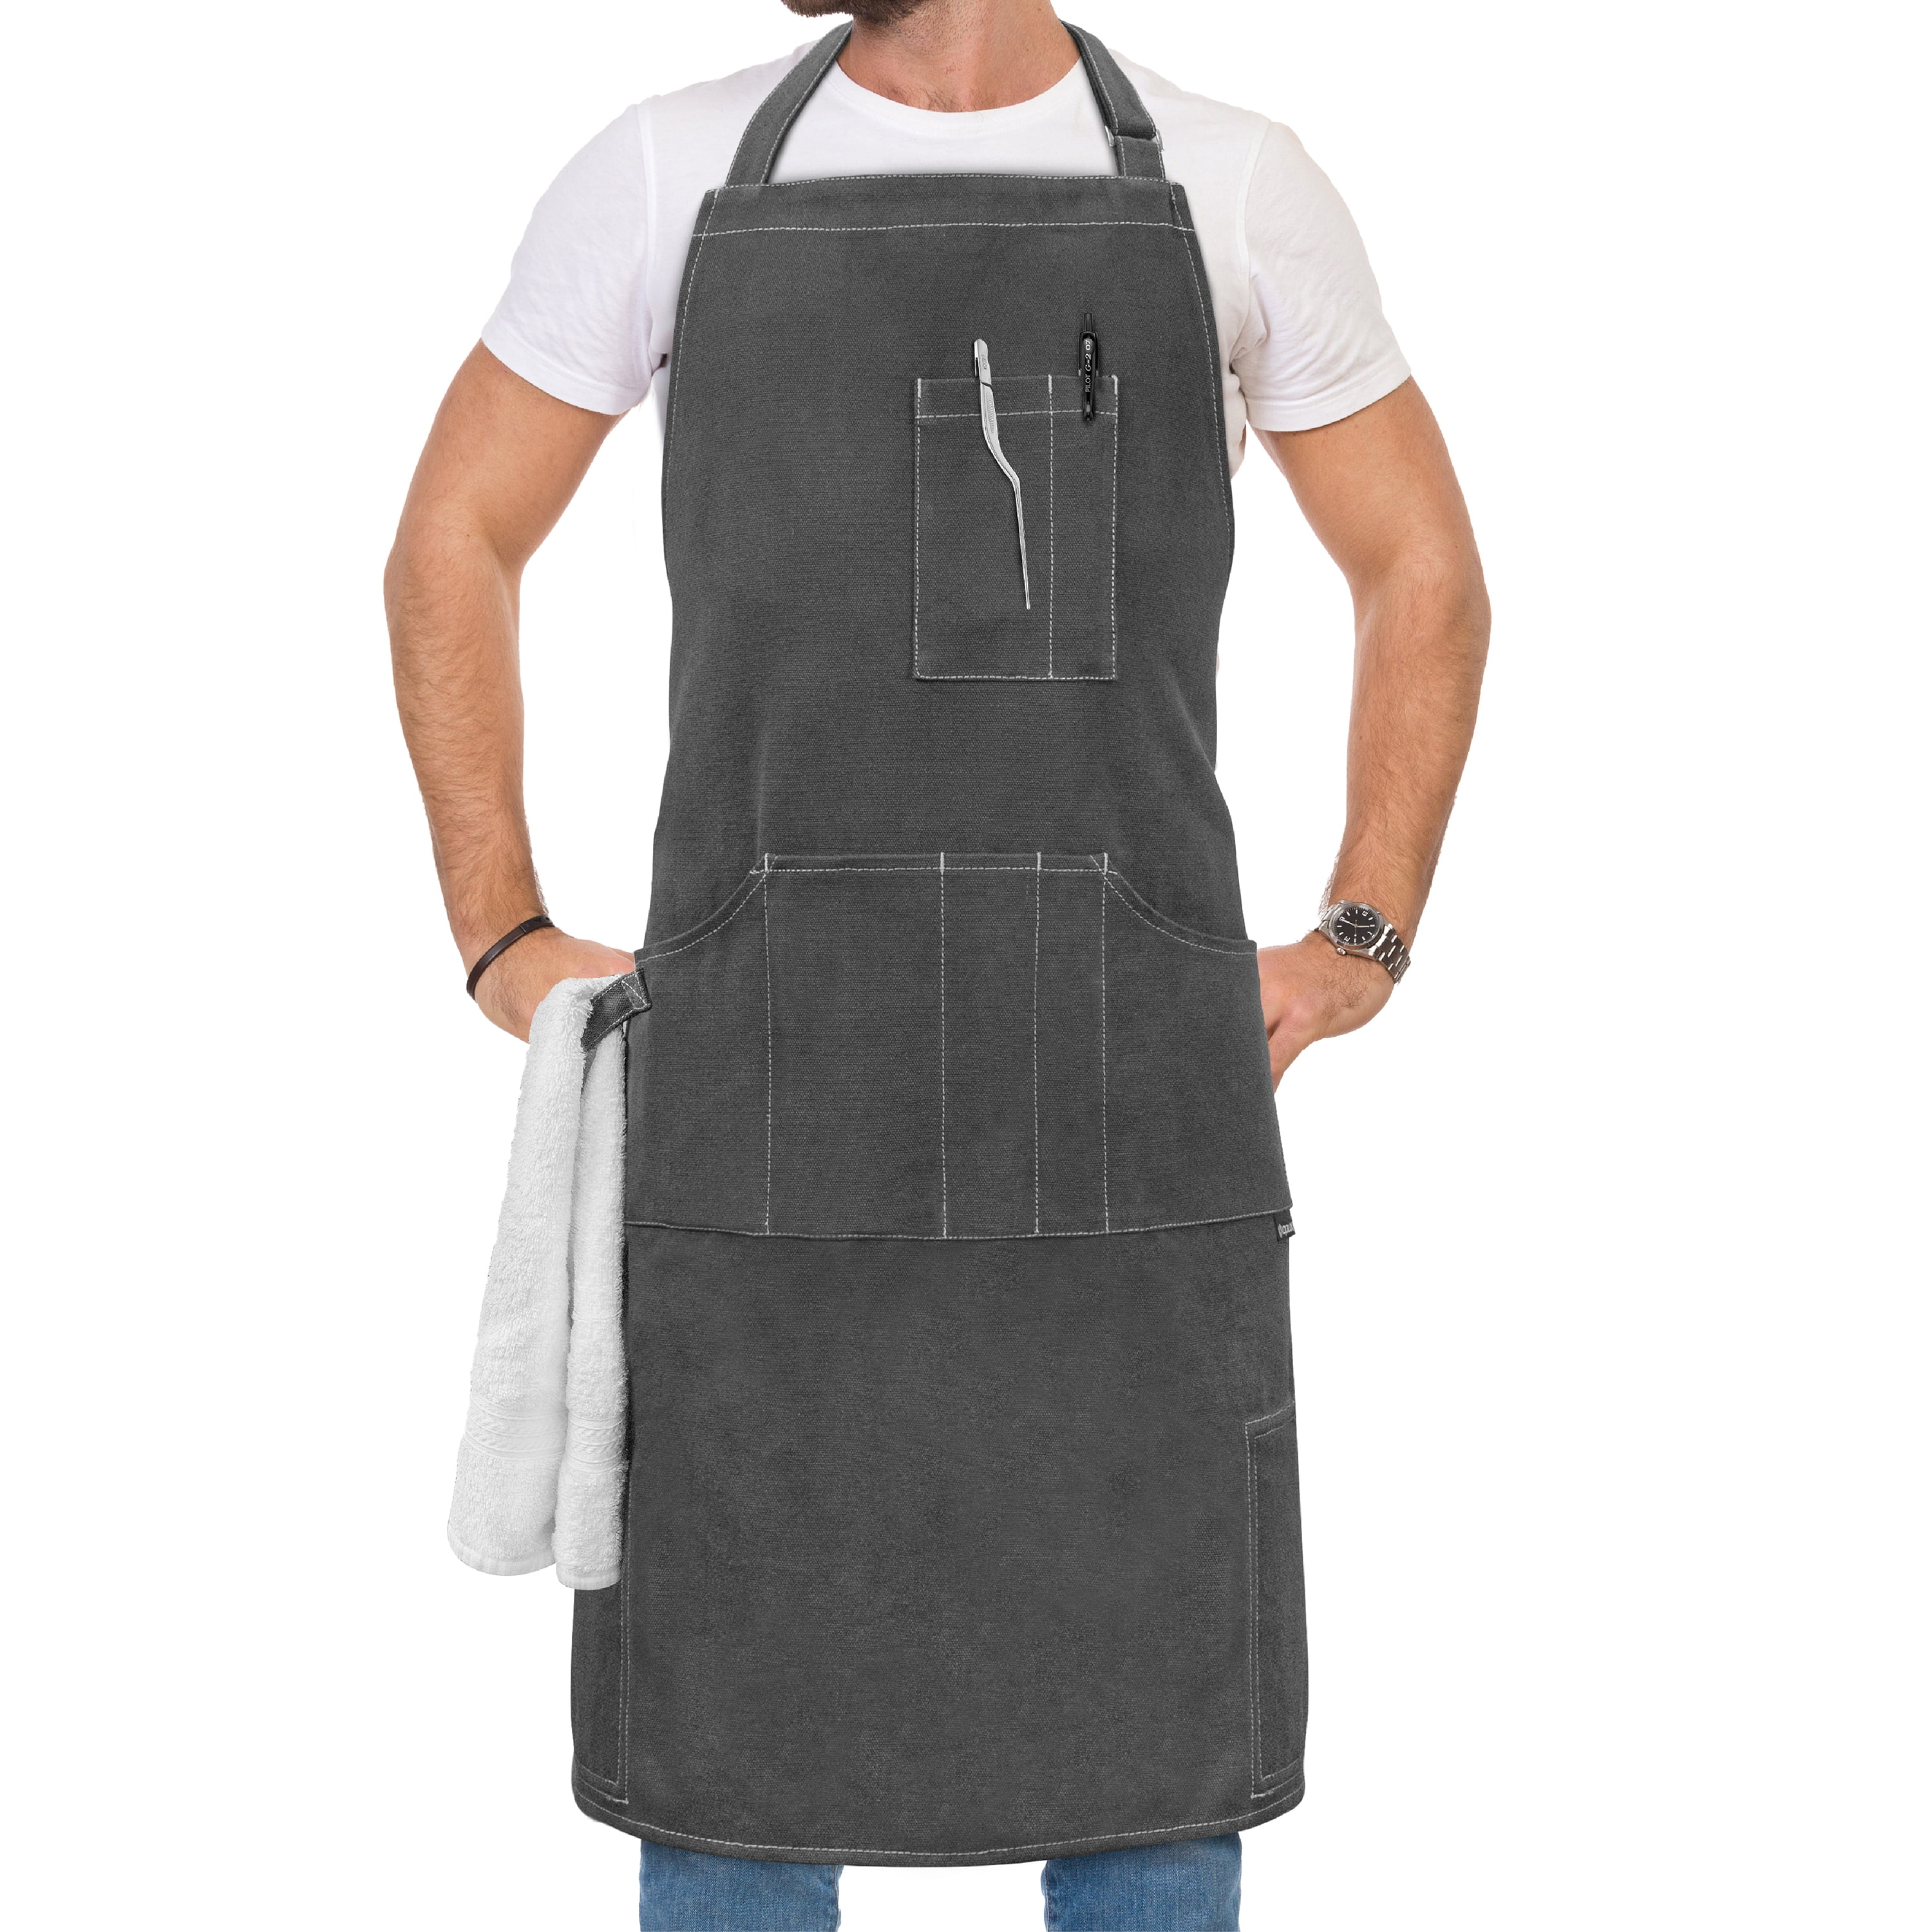 100% Cotton Aprons with Pocket for Chefs Craft Baking Oven Kitchen BBQ Cooking 